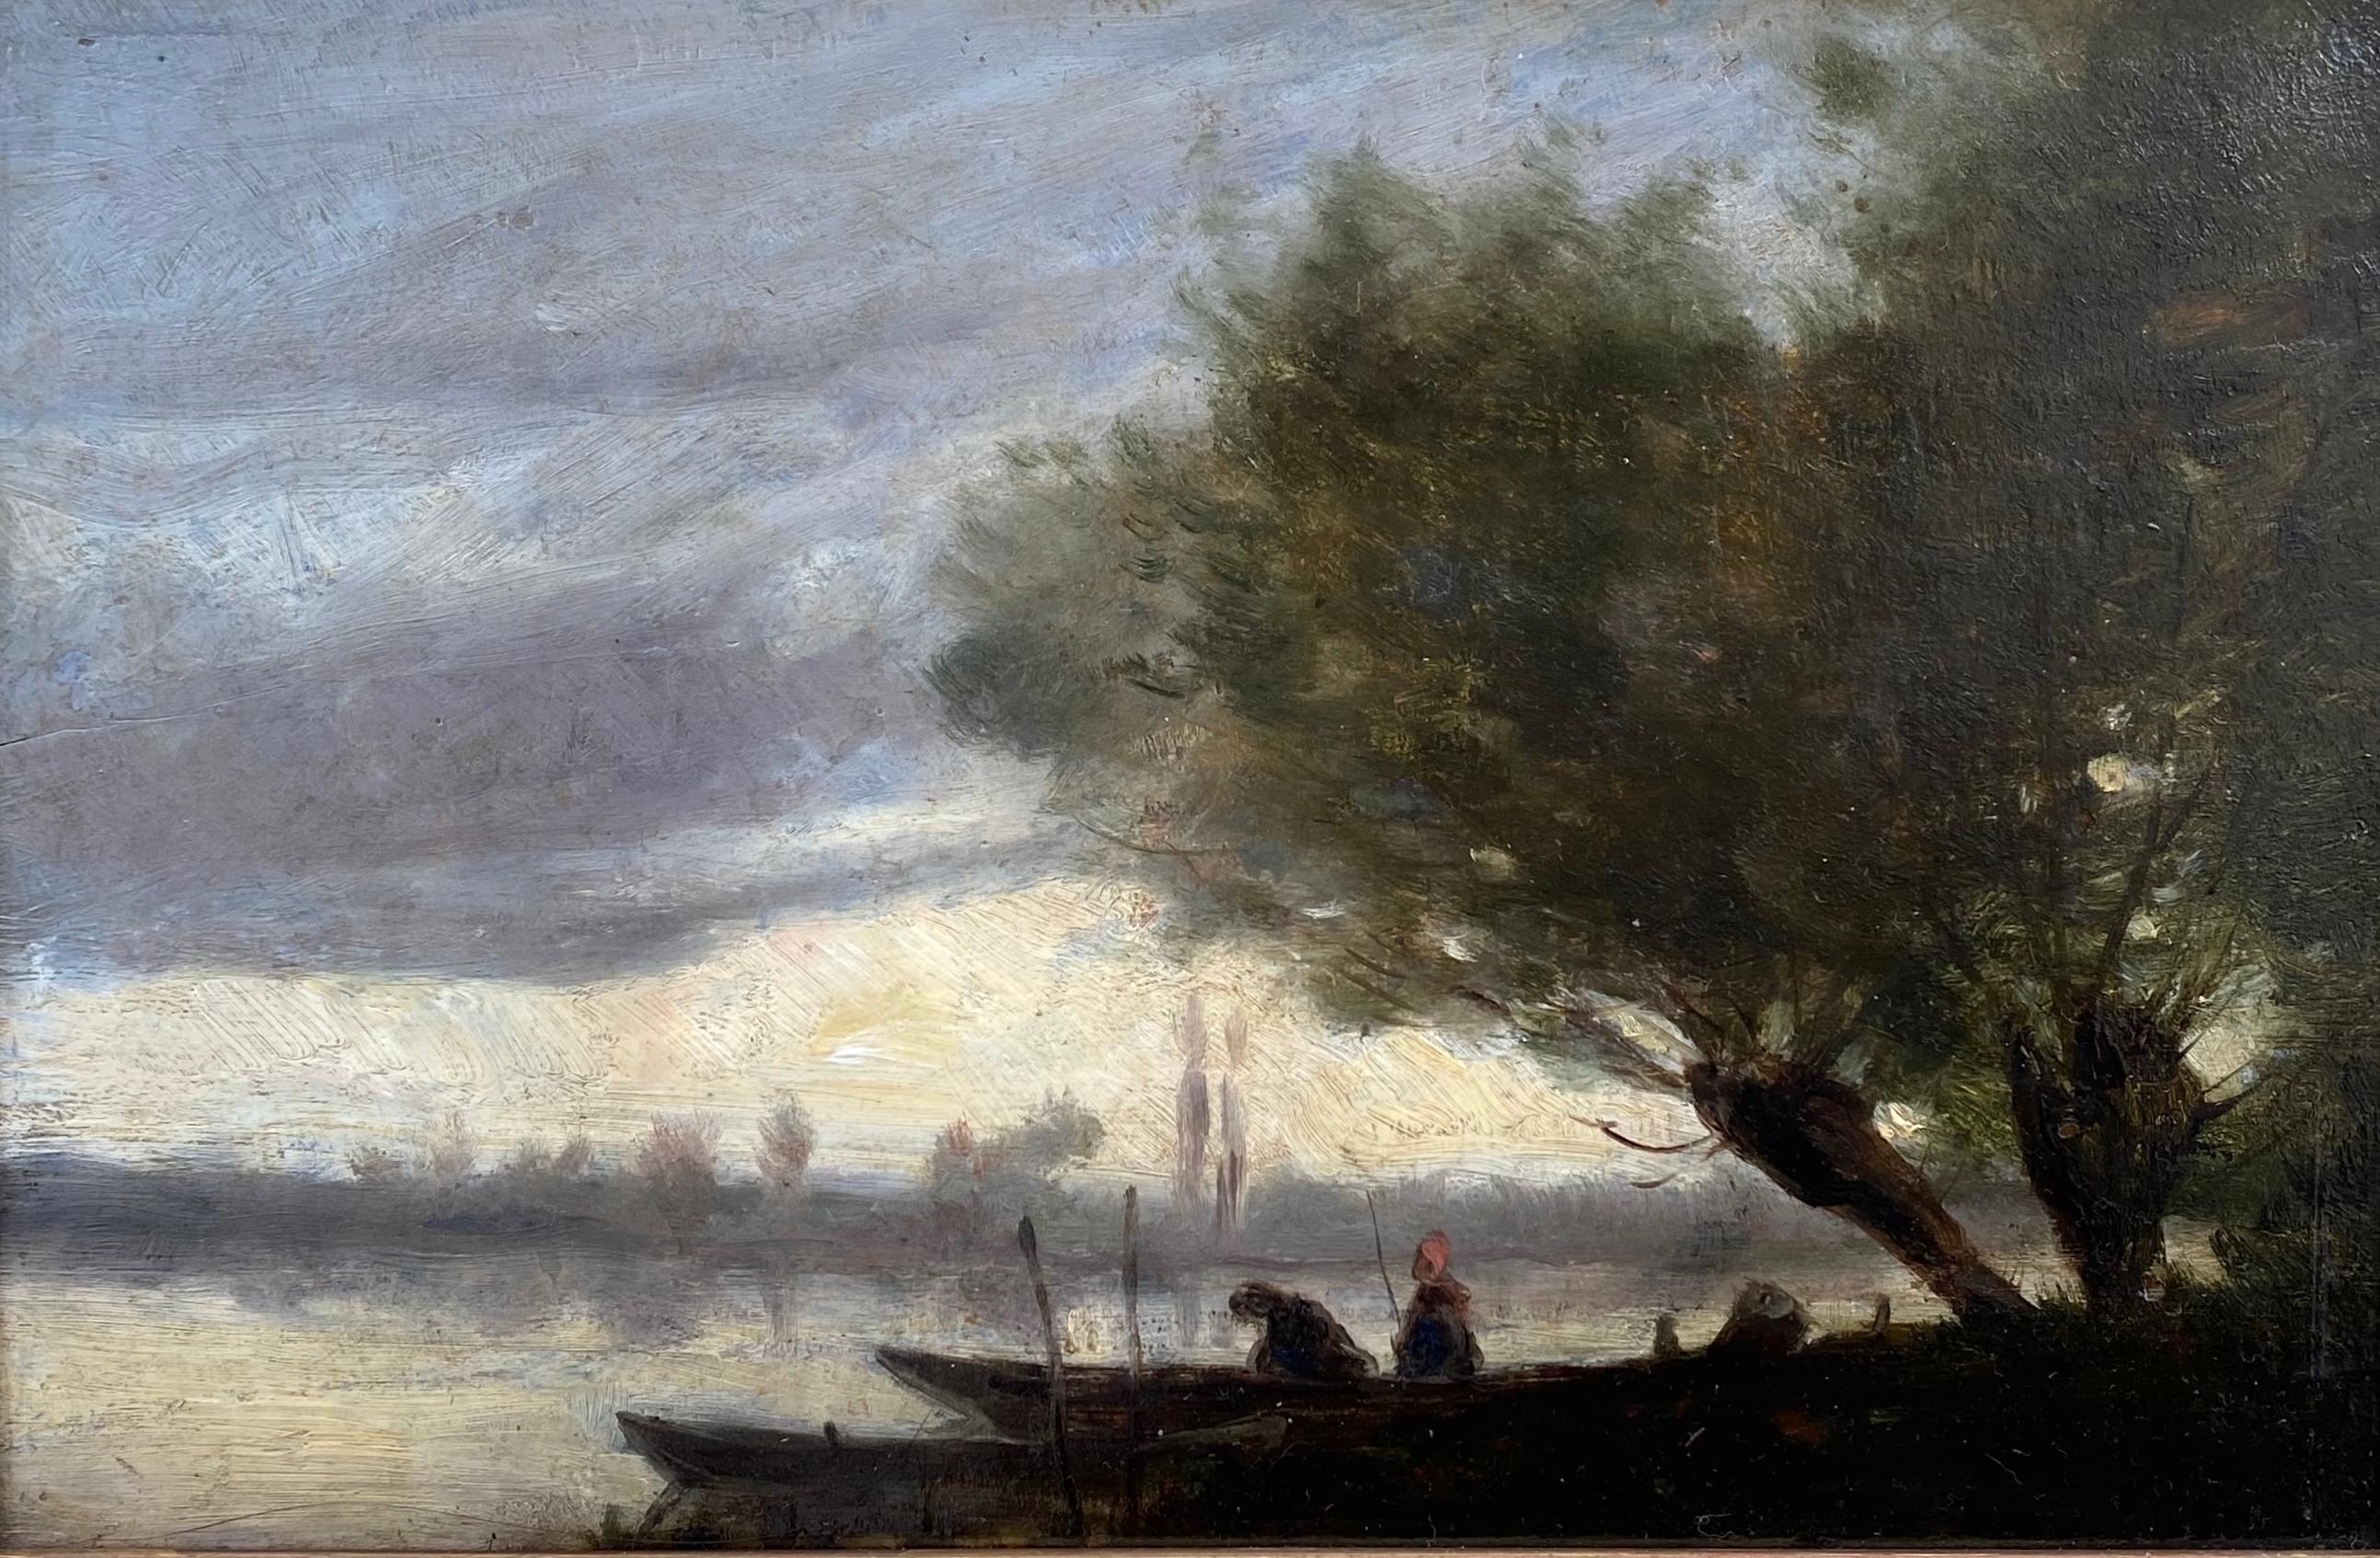 Fishing by Moonlight manner of Corot: Mooonlit lake French Barbizon oil painting - Barbizon School Painting by Jean-Baptiste-Camille Corot